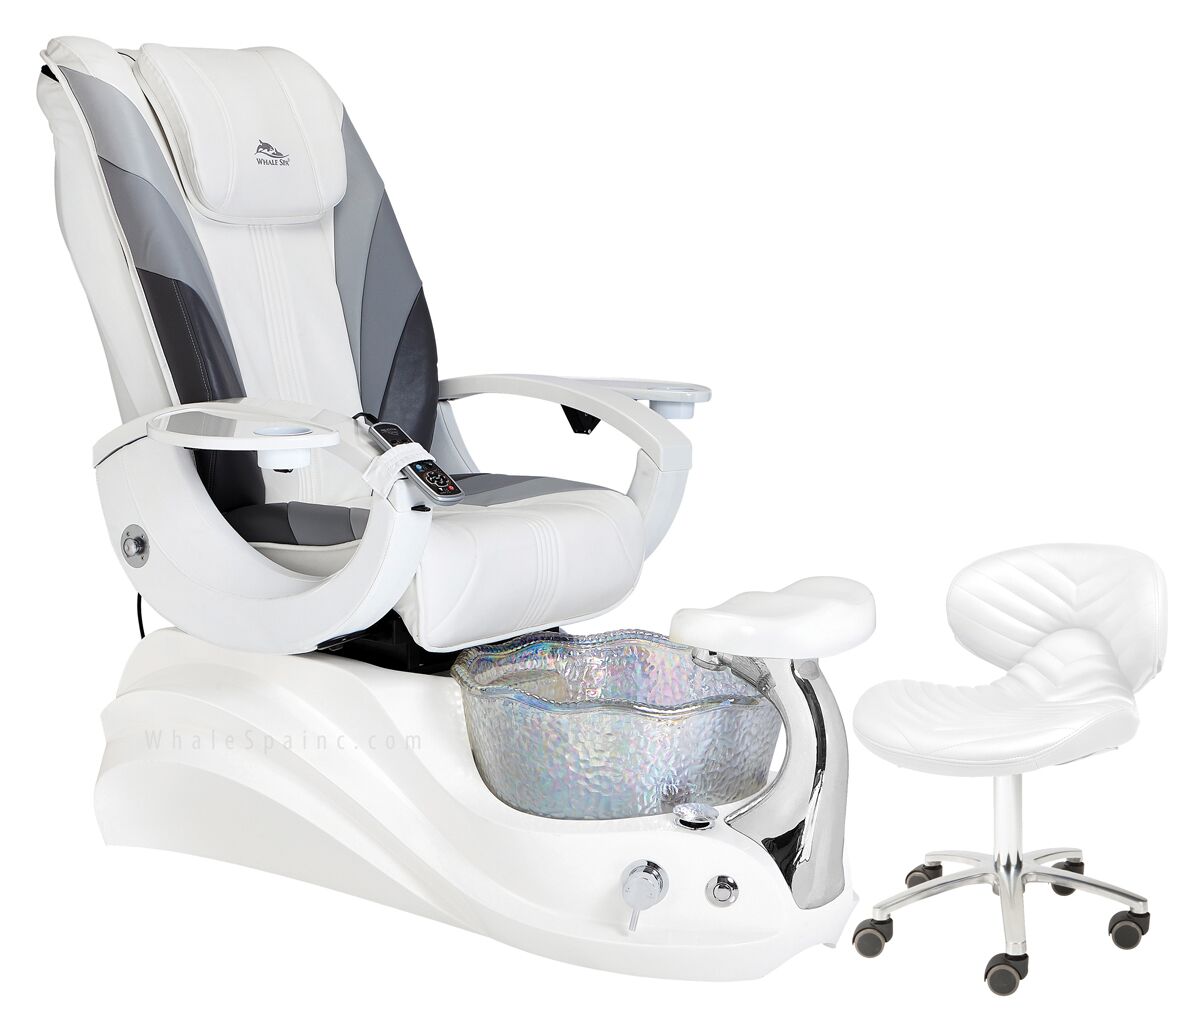 Whale Spa - Alden Crystal Pedicure Spa Chair